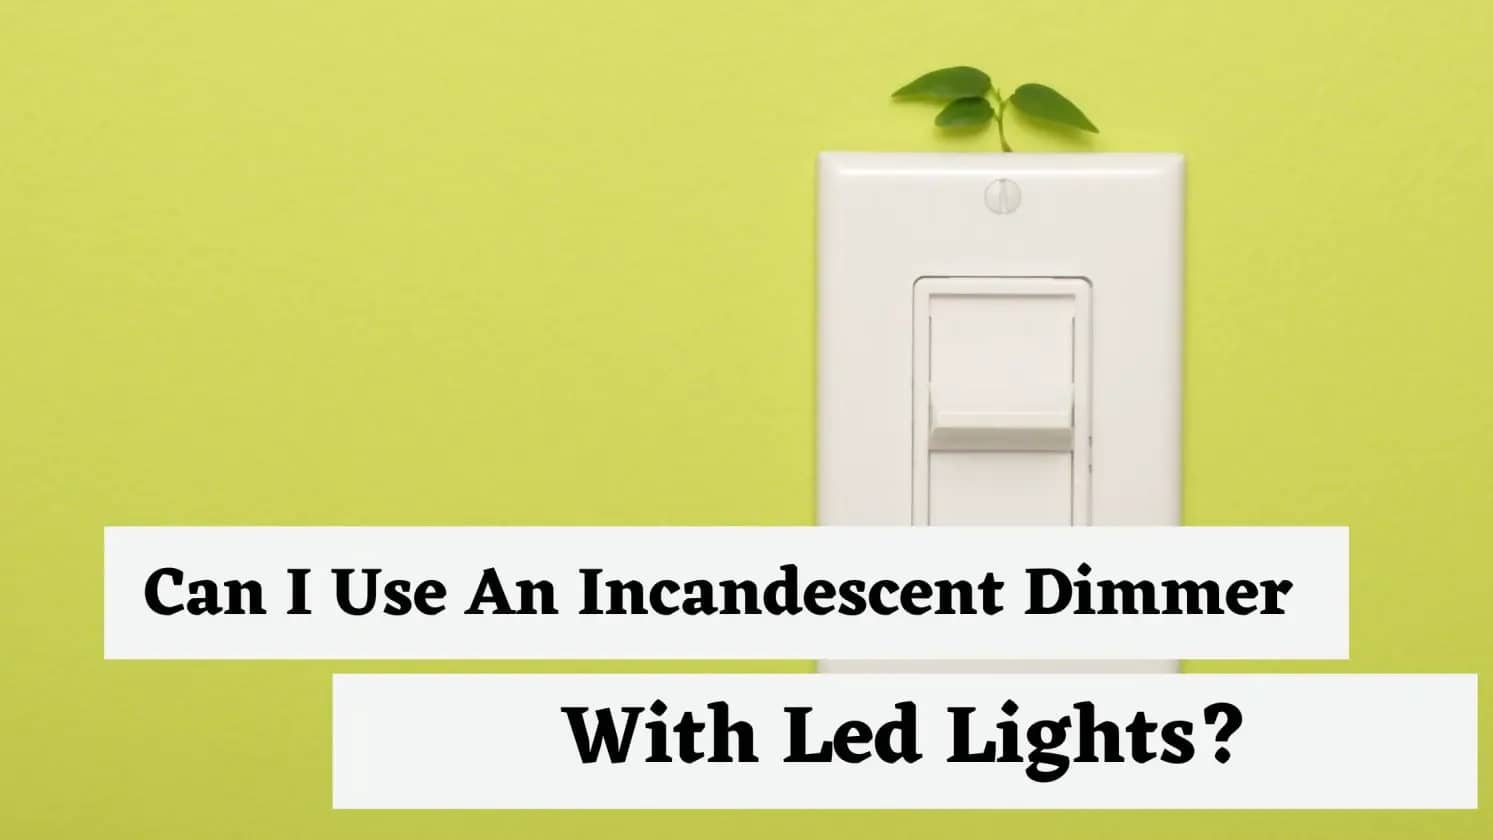 Can I Use An Incandescent Dimmer With Led Lights?